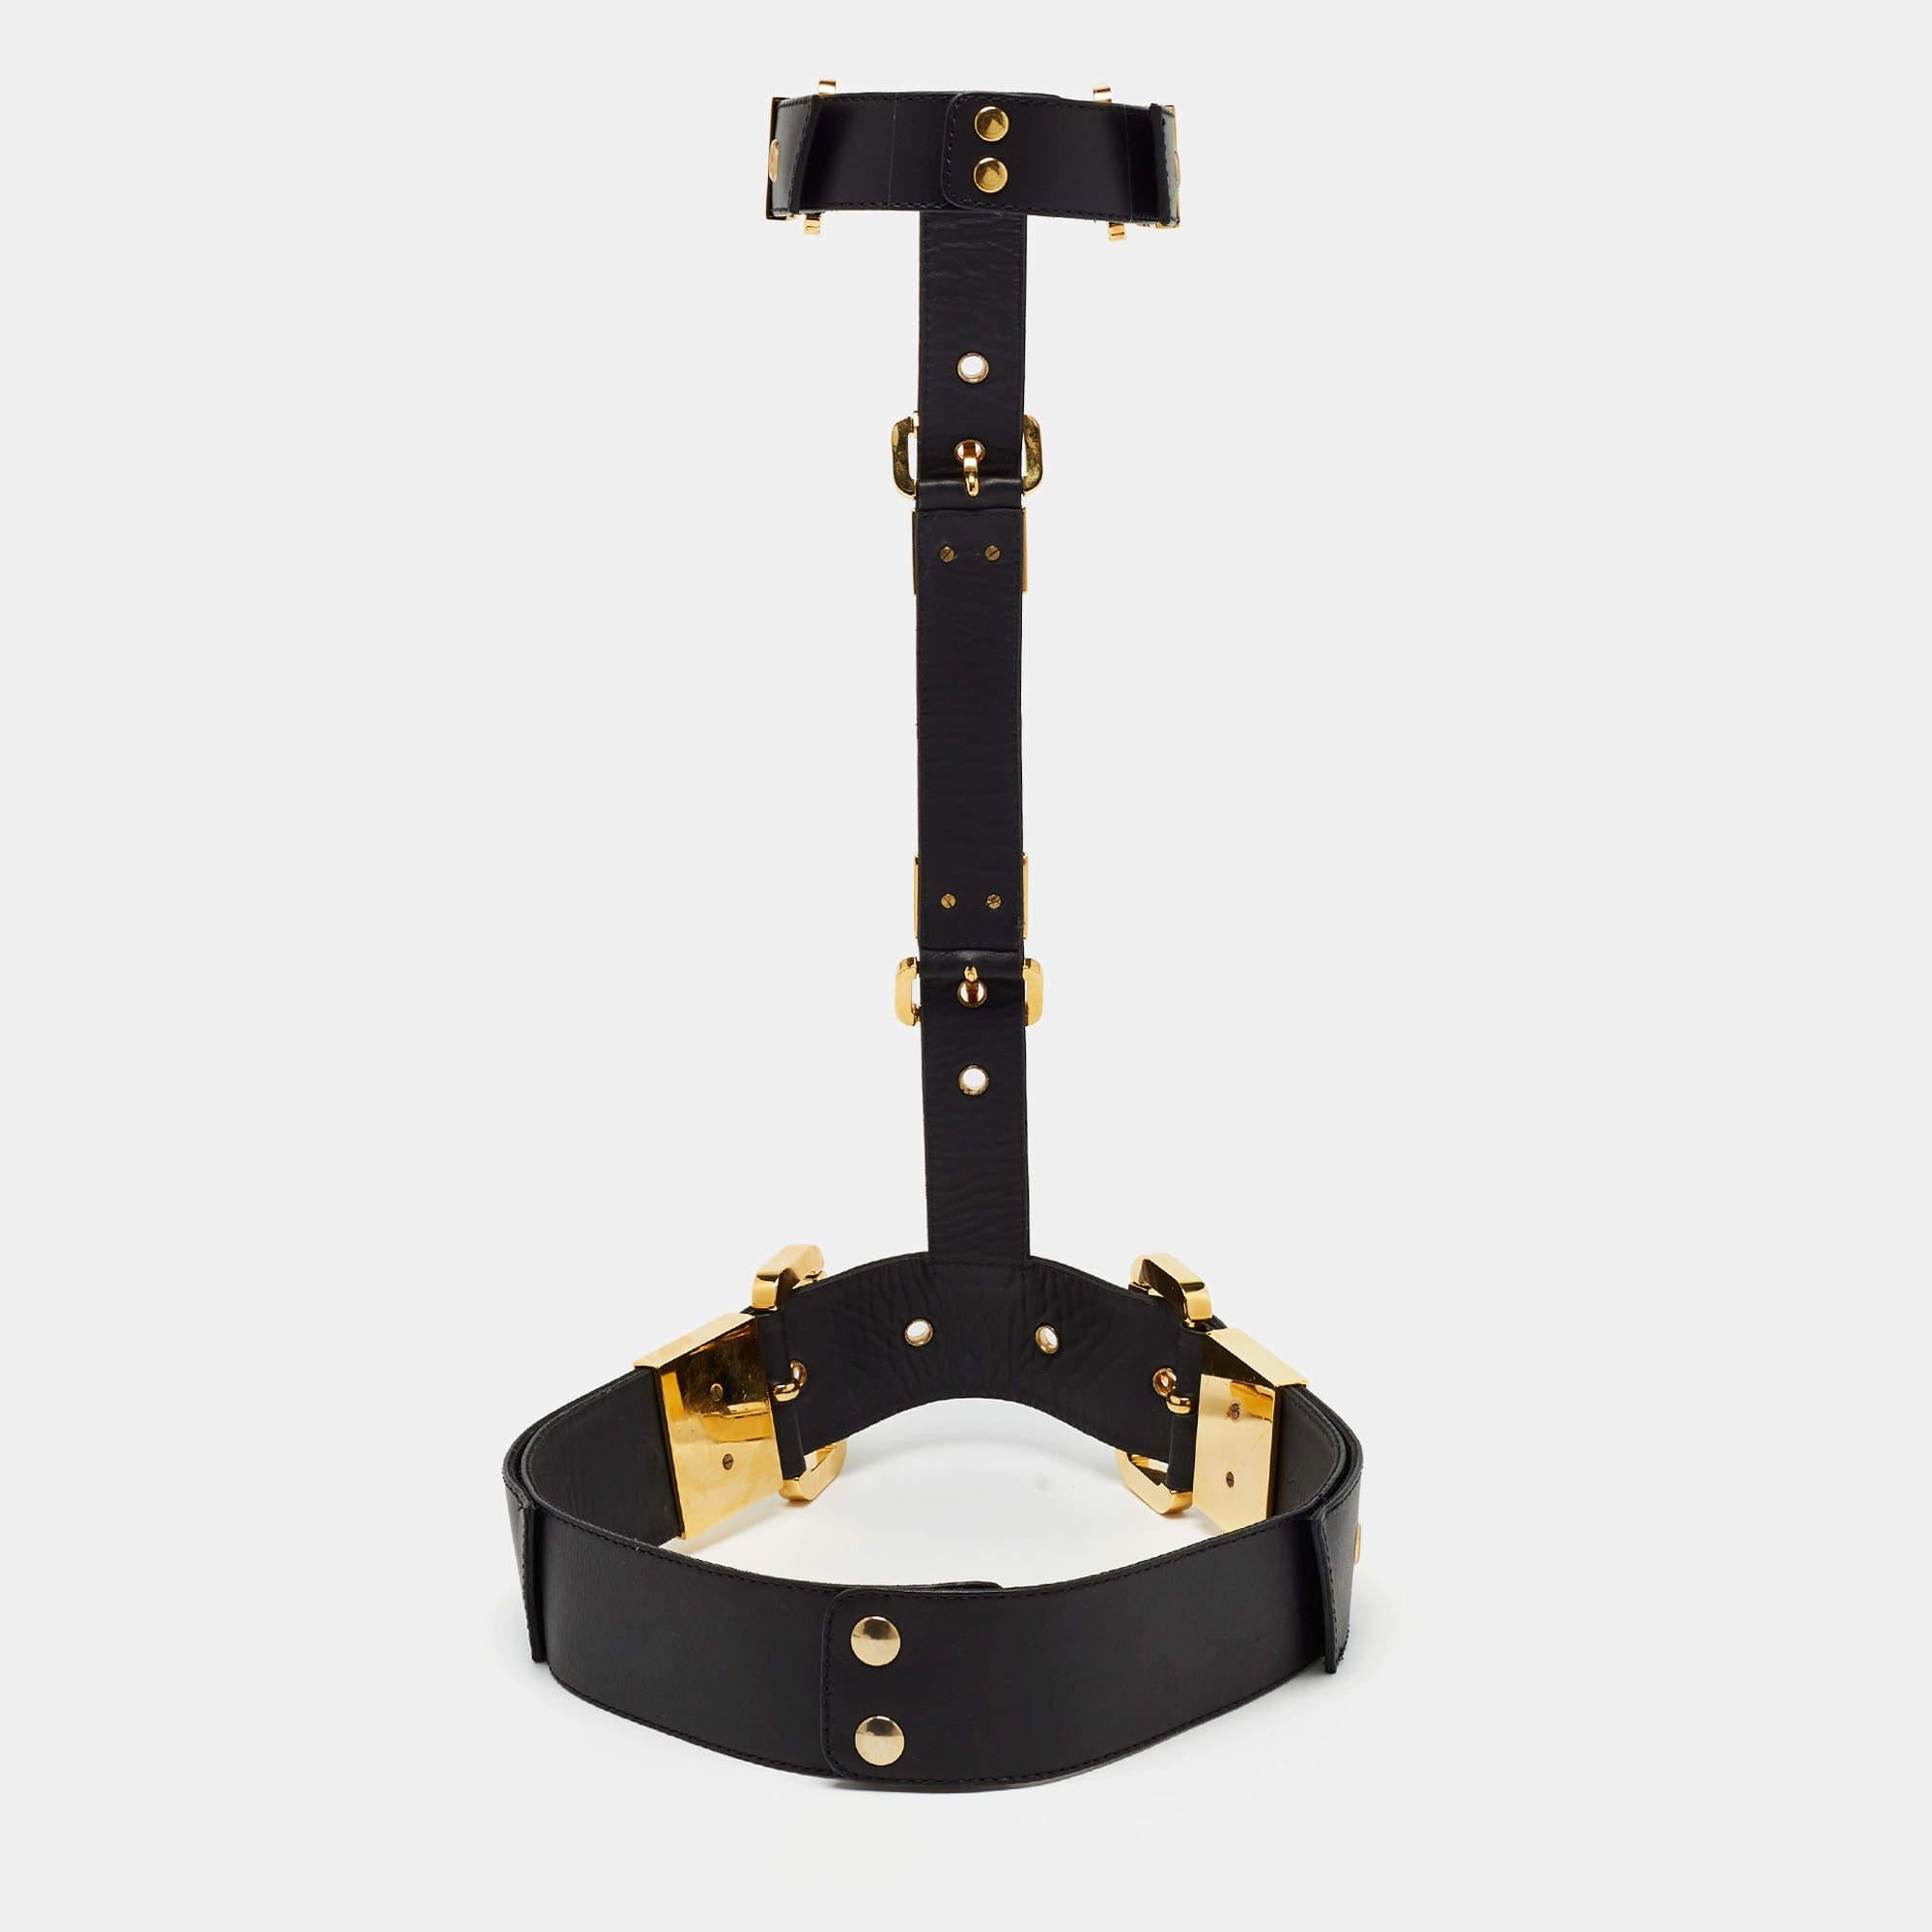 Giuseppe Zanotti's body harness belt is a statement piece. It is crafted using black leather for a connected choker and waist belt design and has gold-tone metal details.

